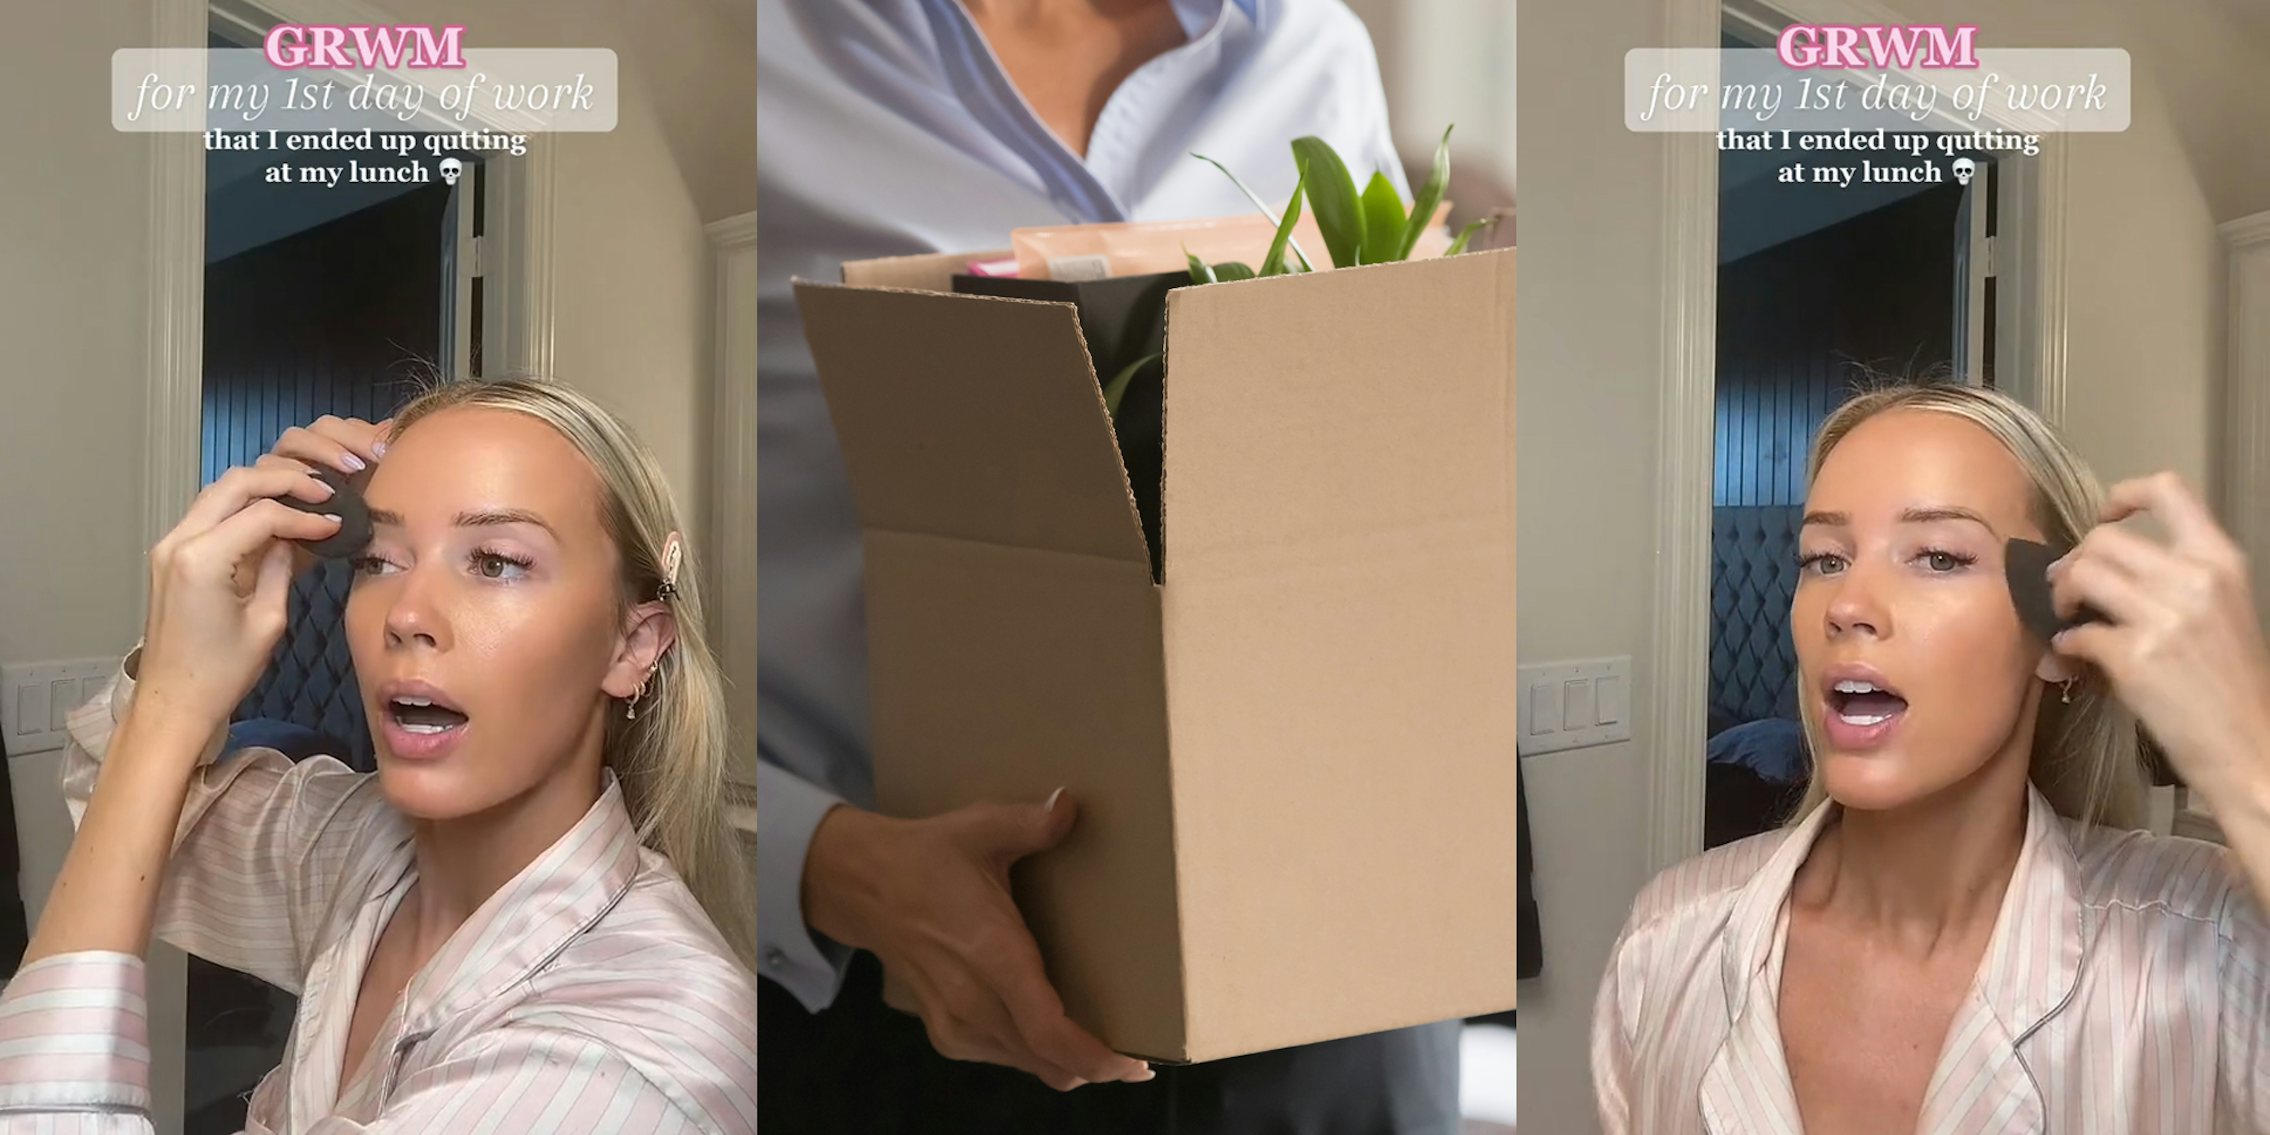 woman applying makeup with caption 'GRWM for my 1st day of work that I ended up quitting at my lunch' (l) woman gathering belongings in cardboard box quitting job concept (c) woman applying makeup with caption 'GRWM for my 1st day of work that I ended up quitting at my lunch' (r)